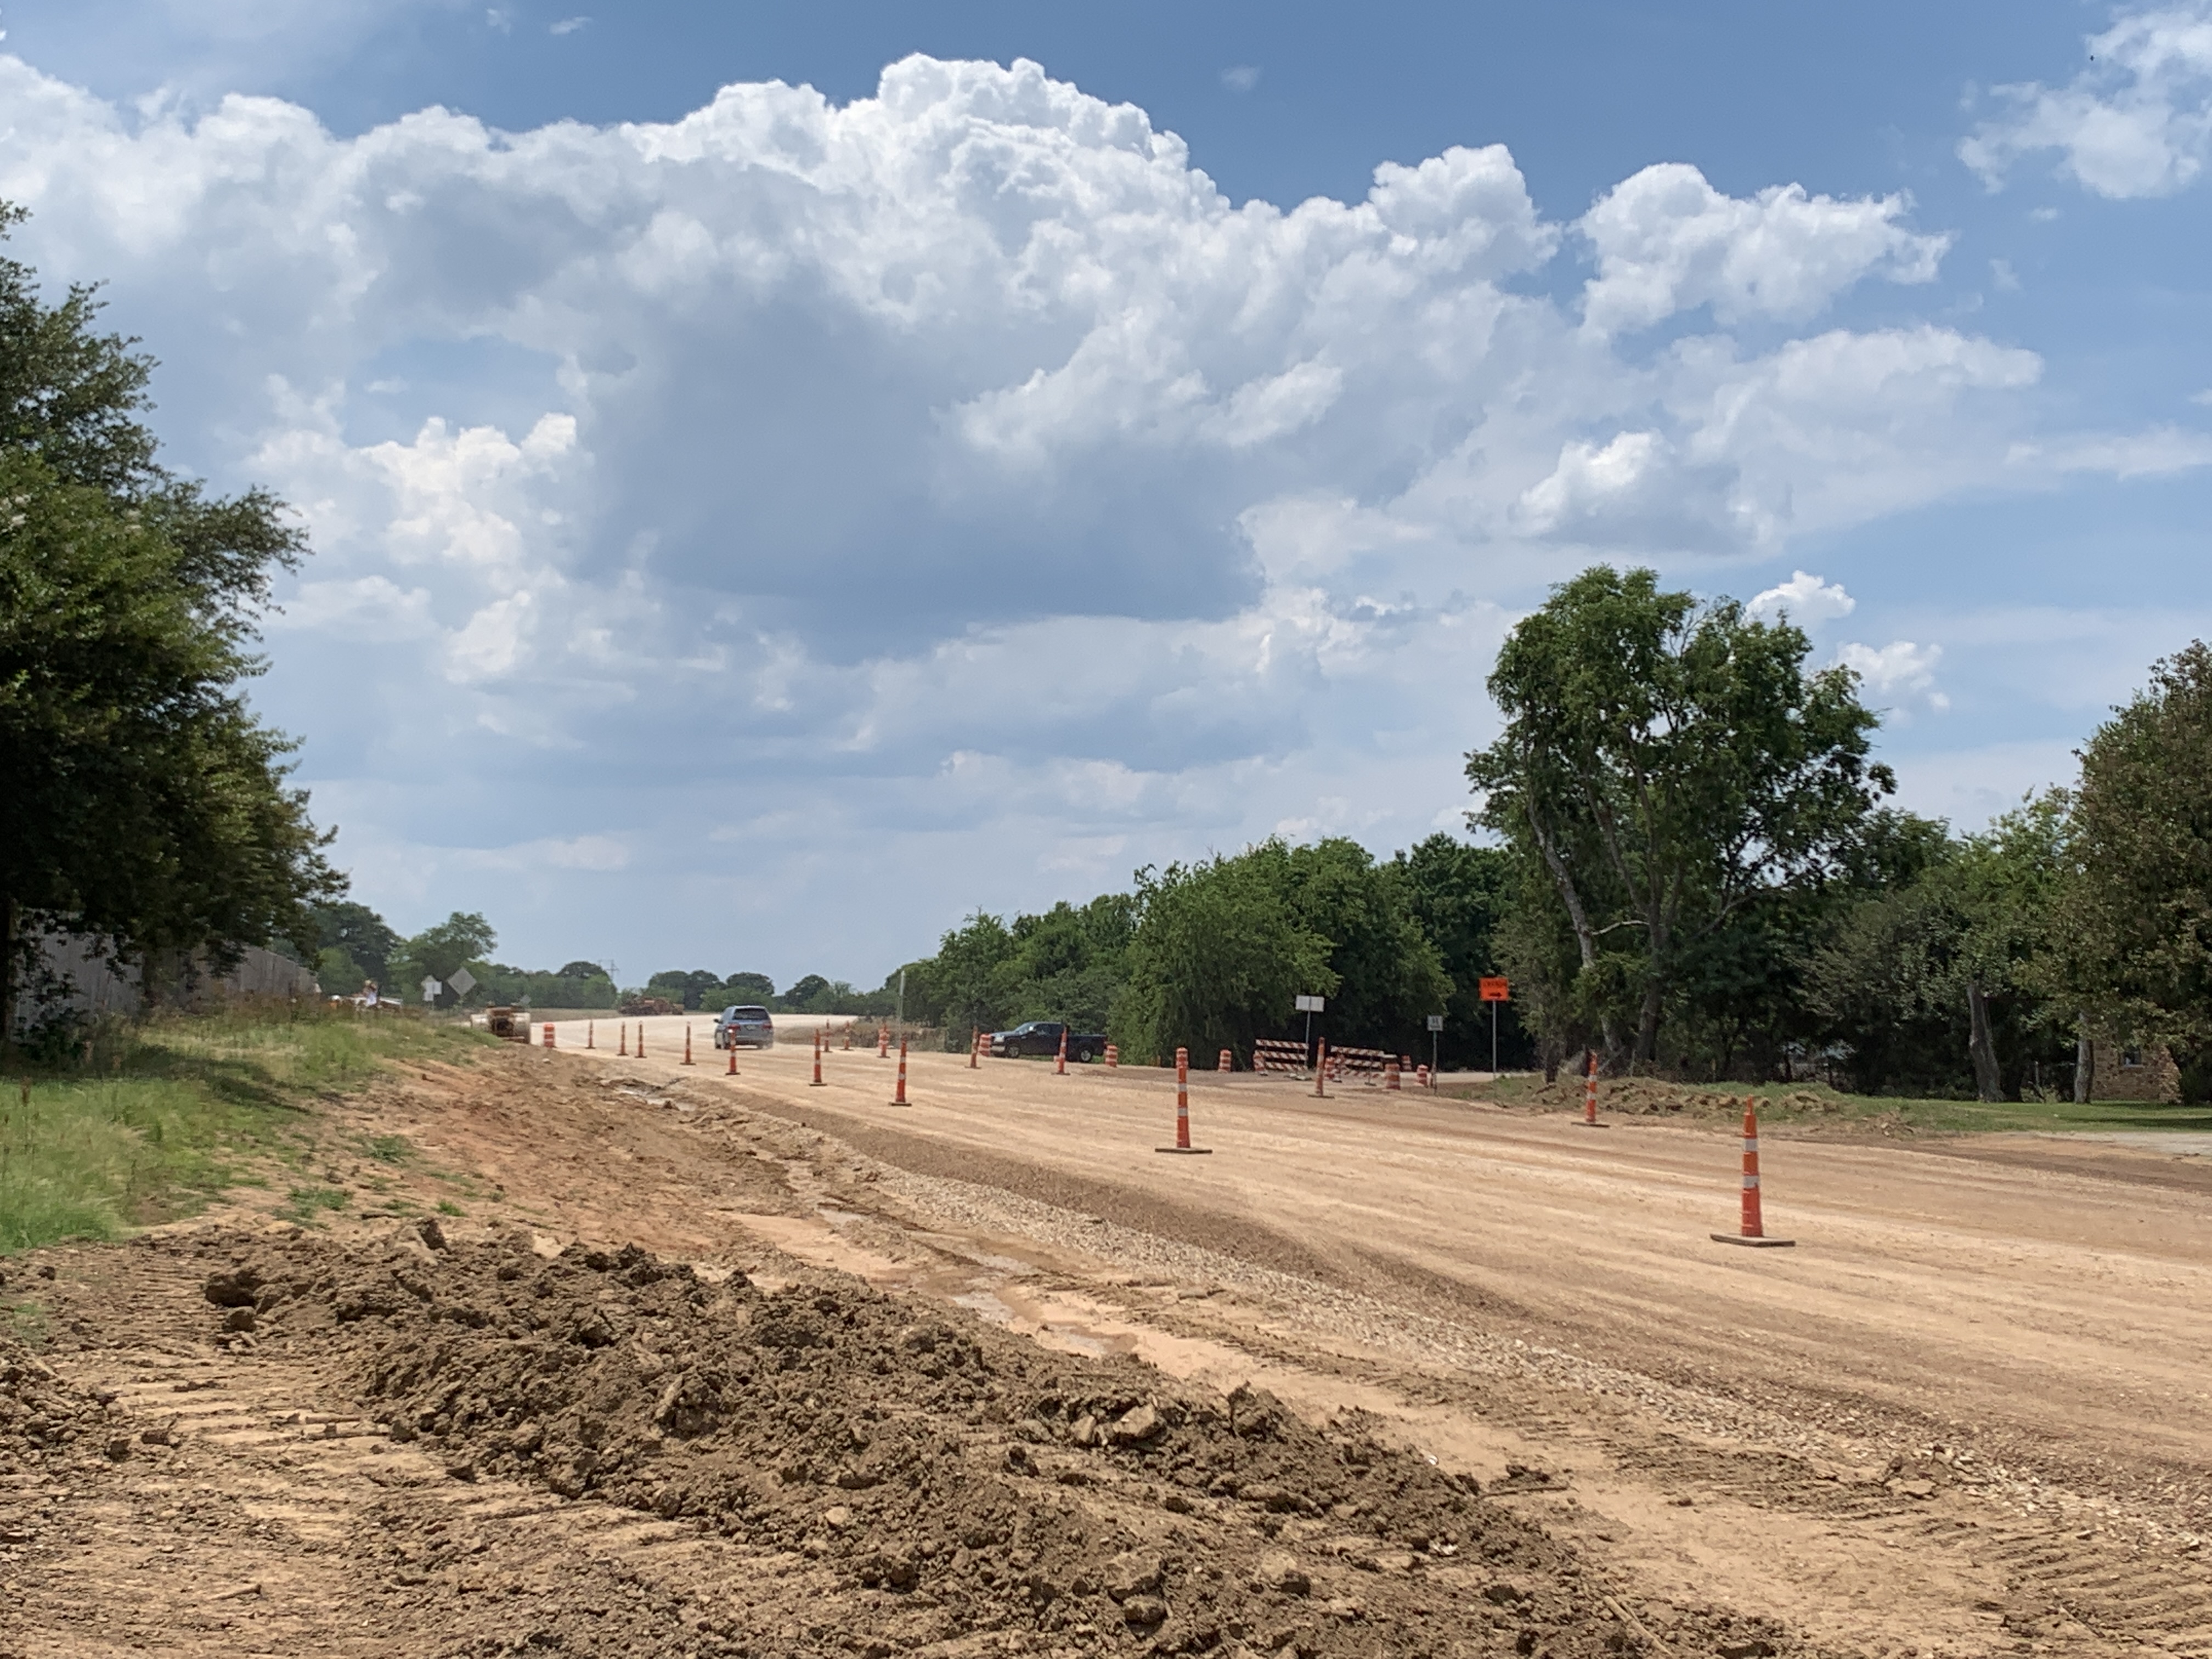 Traffic Shifted to New Roadway on Highway 11